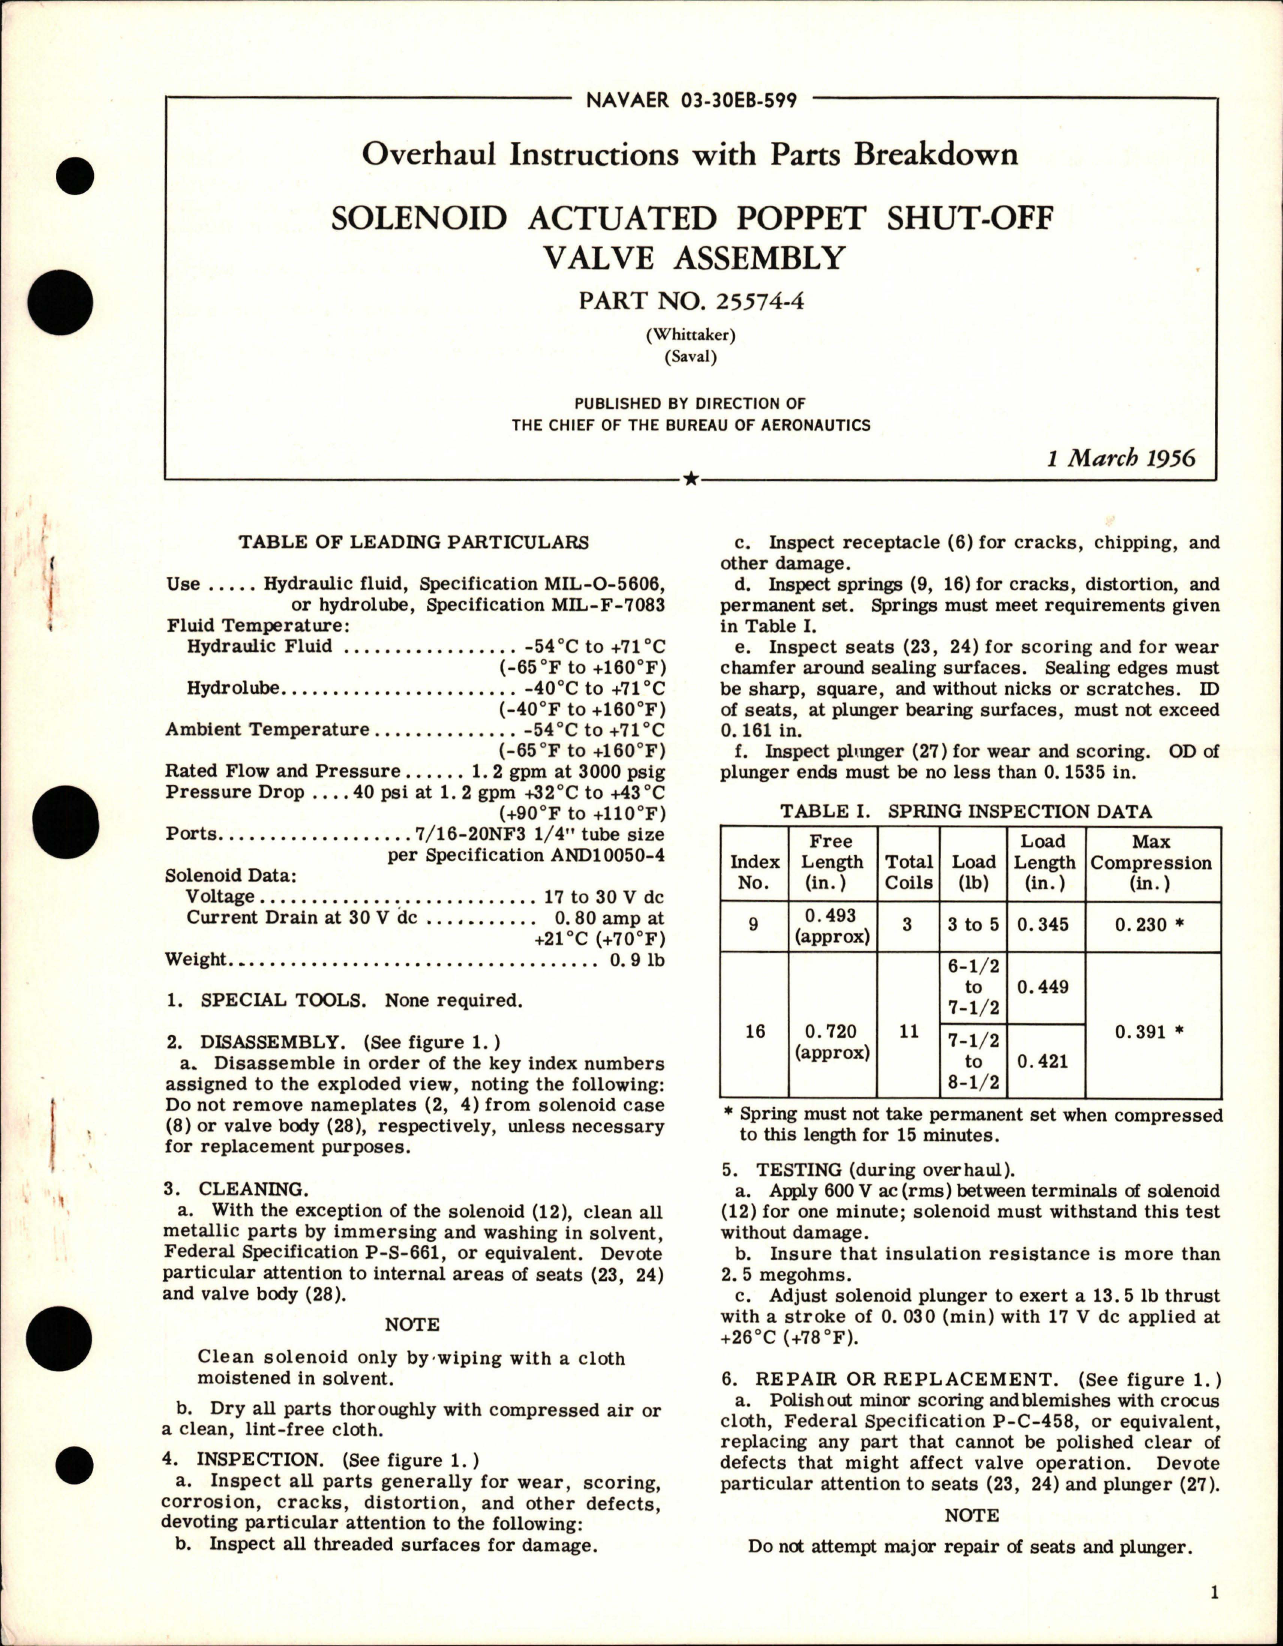 Sample page 1 from AirCorps Library document: Overhaul Instructions with Parts Breakdown for Solenoid Actuated Poppet Shut-Off Valve Assembly - Part 25574-4